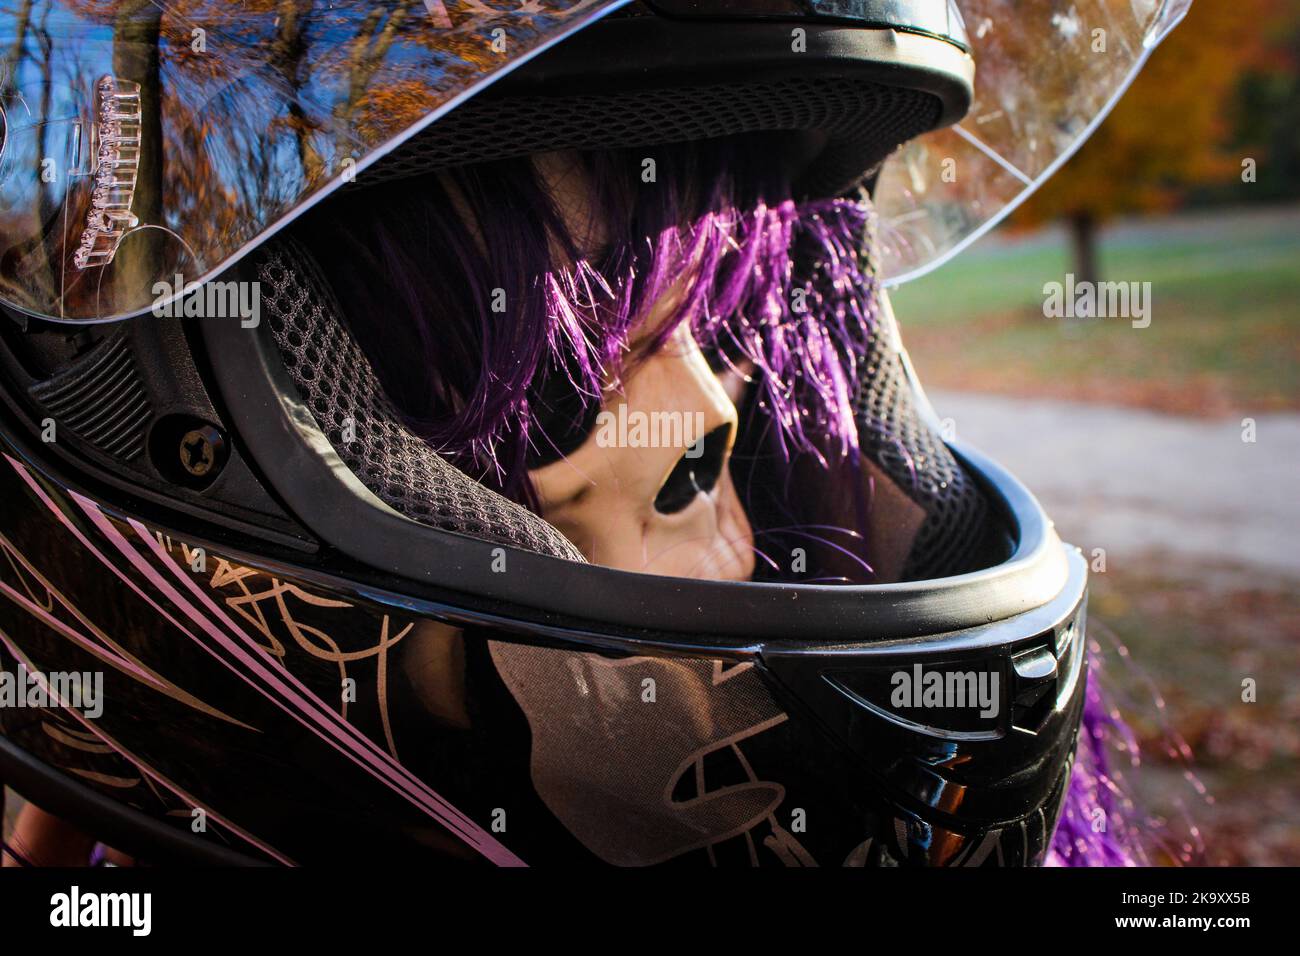 Skeleton with purple hair that has a helmet with shield on her head for safty Stock Photo